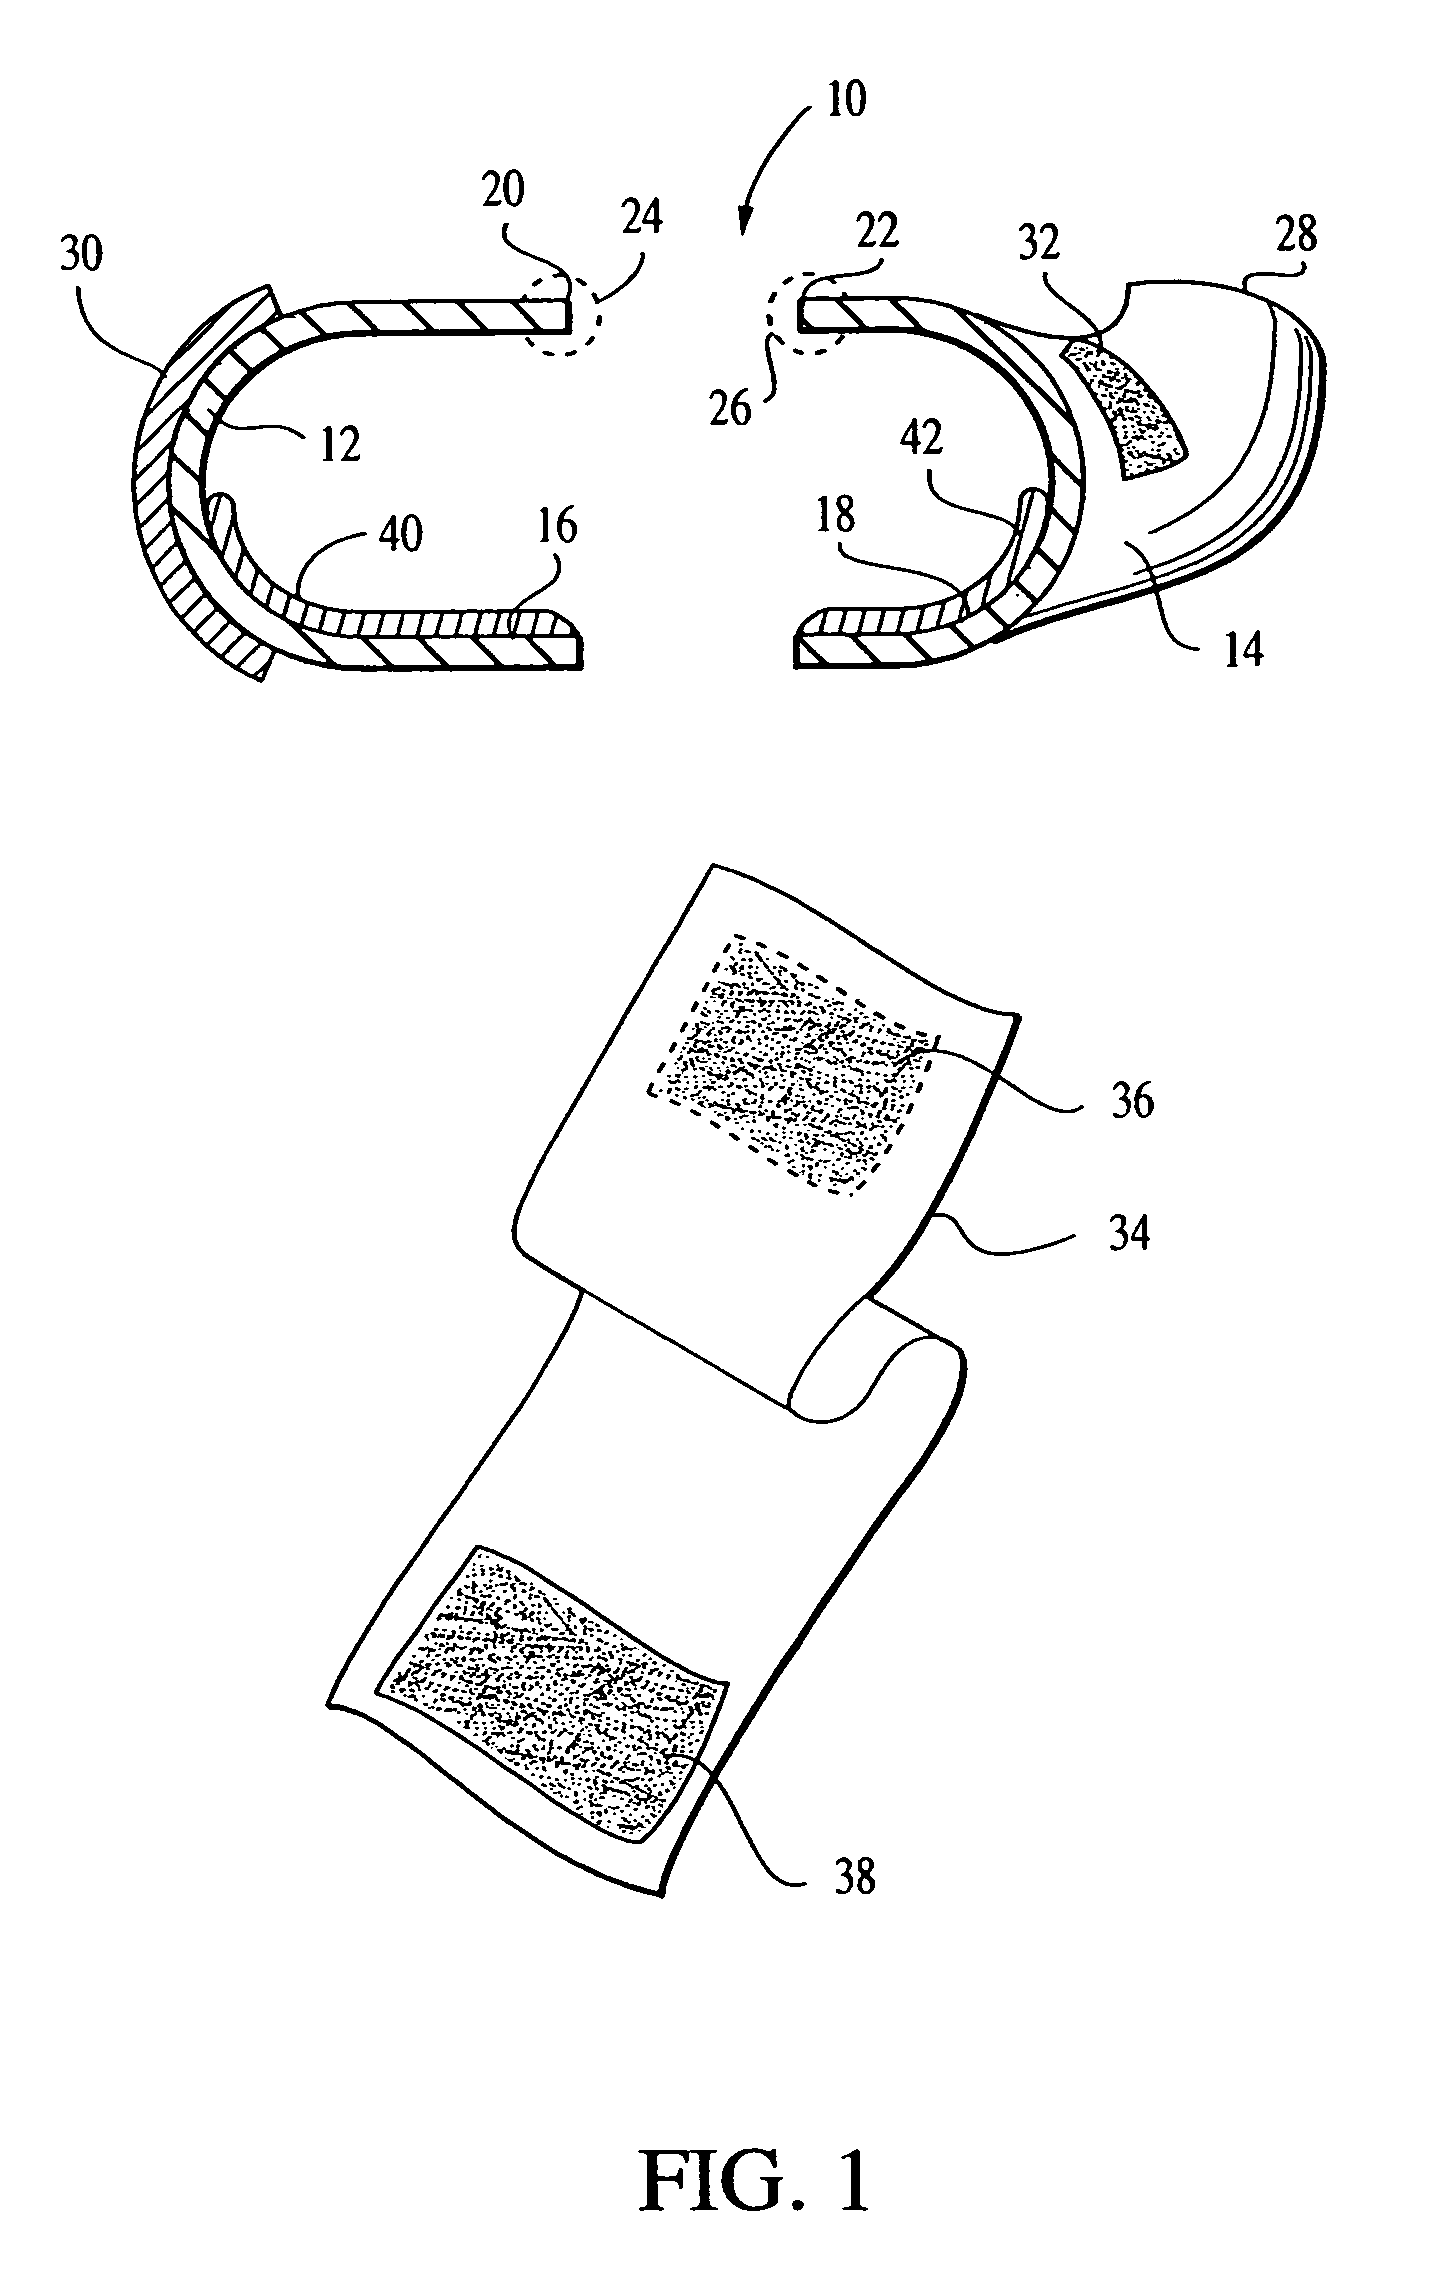 Adaptable apparatus and method for treating carpal tunnel syndrome